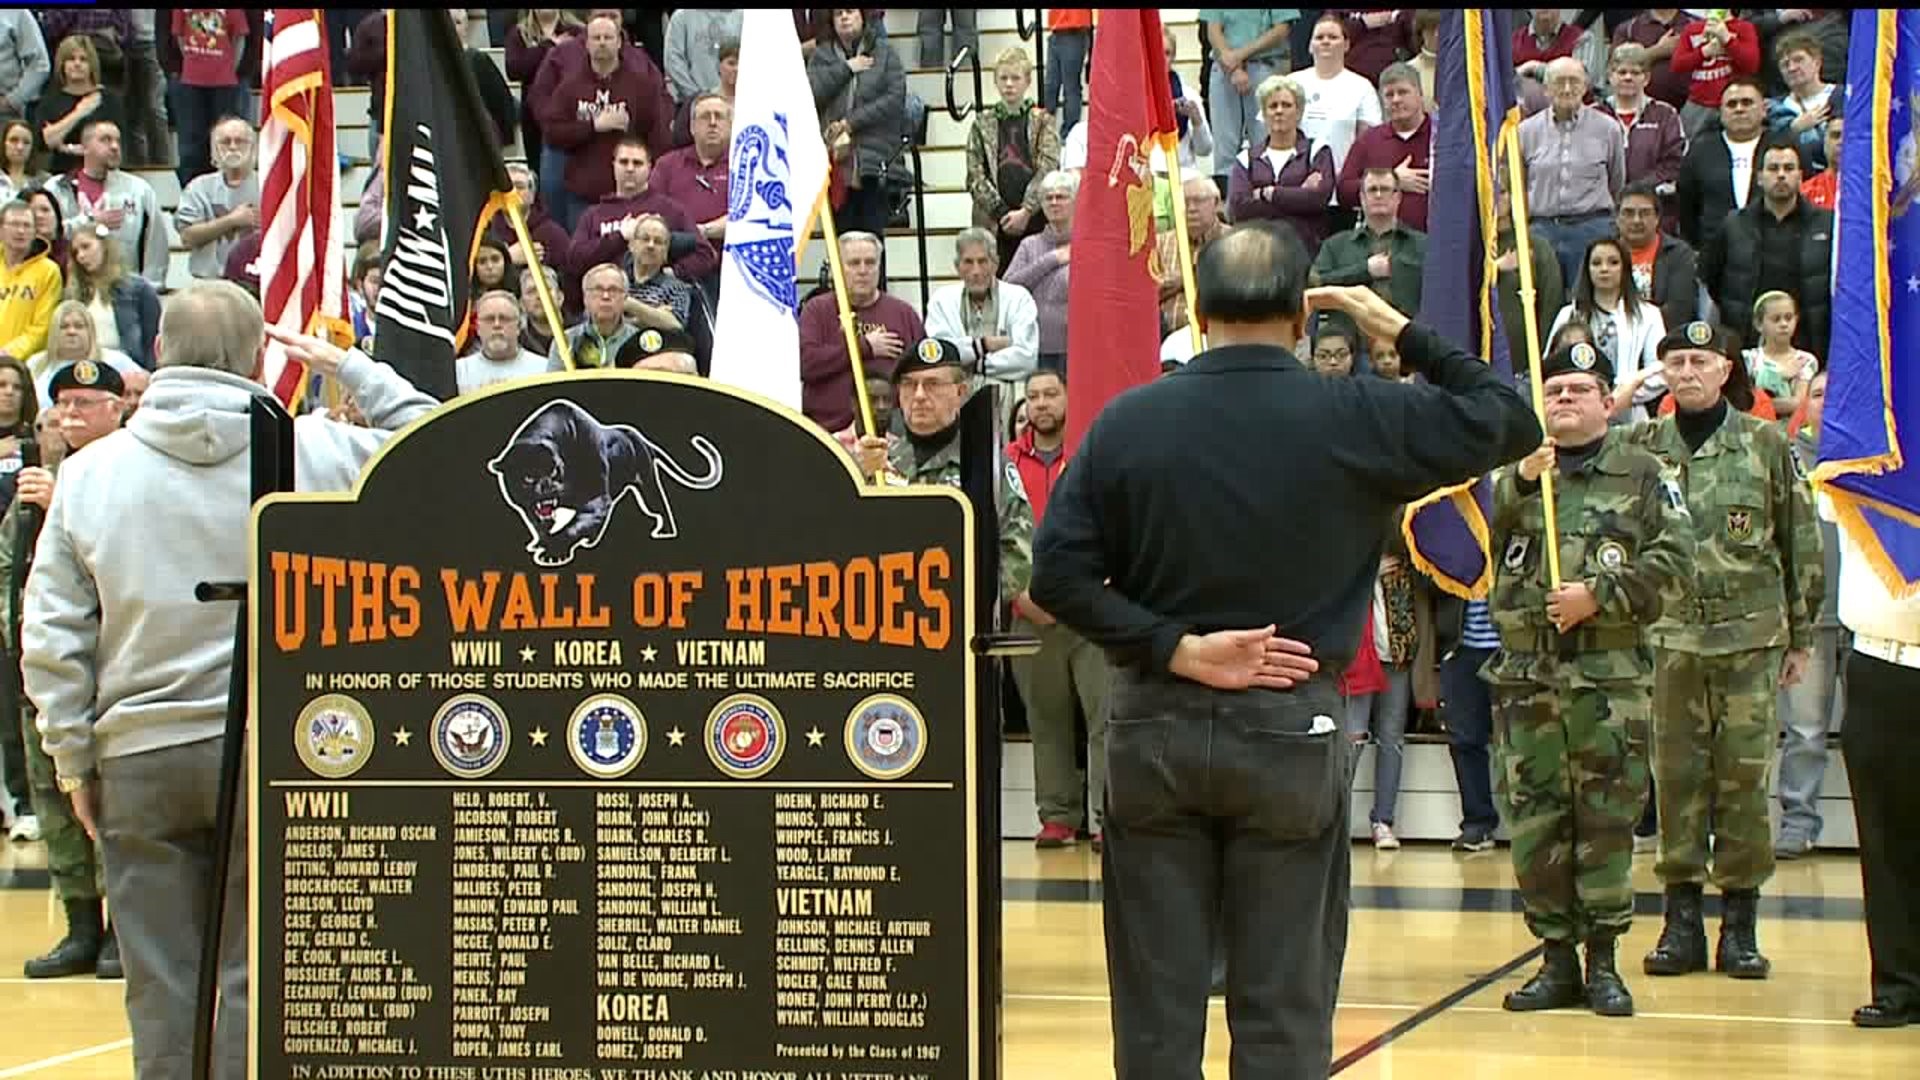 Wall of Heroes plaque presented at United Township High School